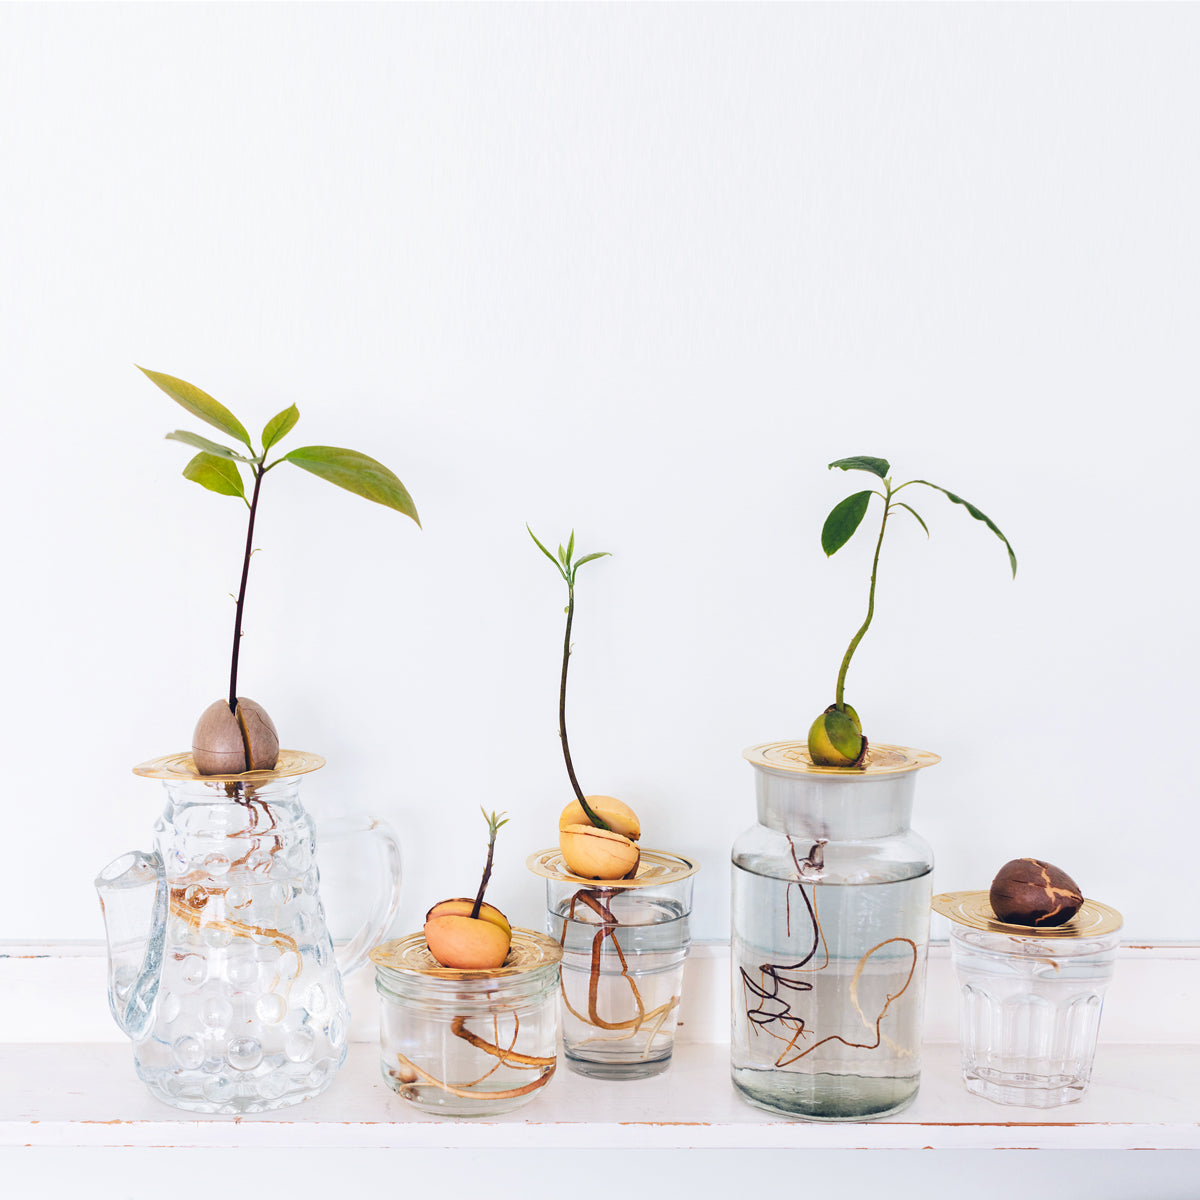 Group of Avocado sprouts with Brass propagation disk Helios - design by House of Thol / photograph by Masha Bakker photography